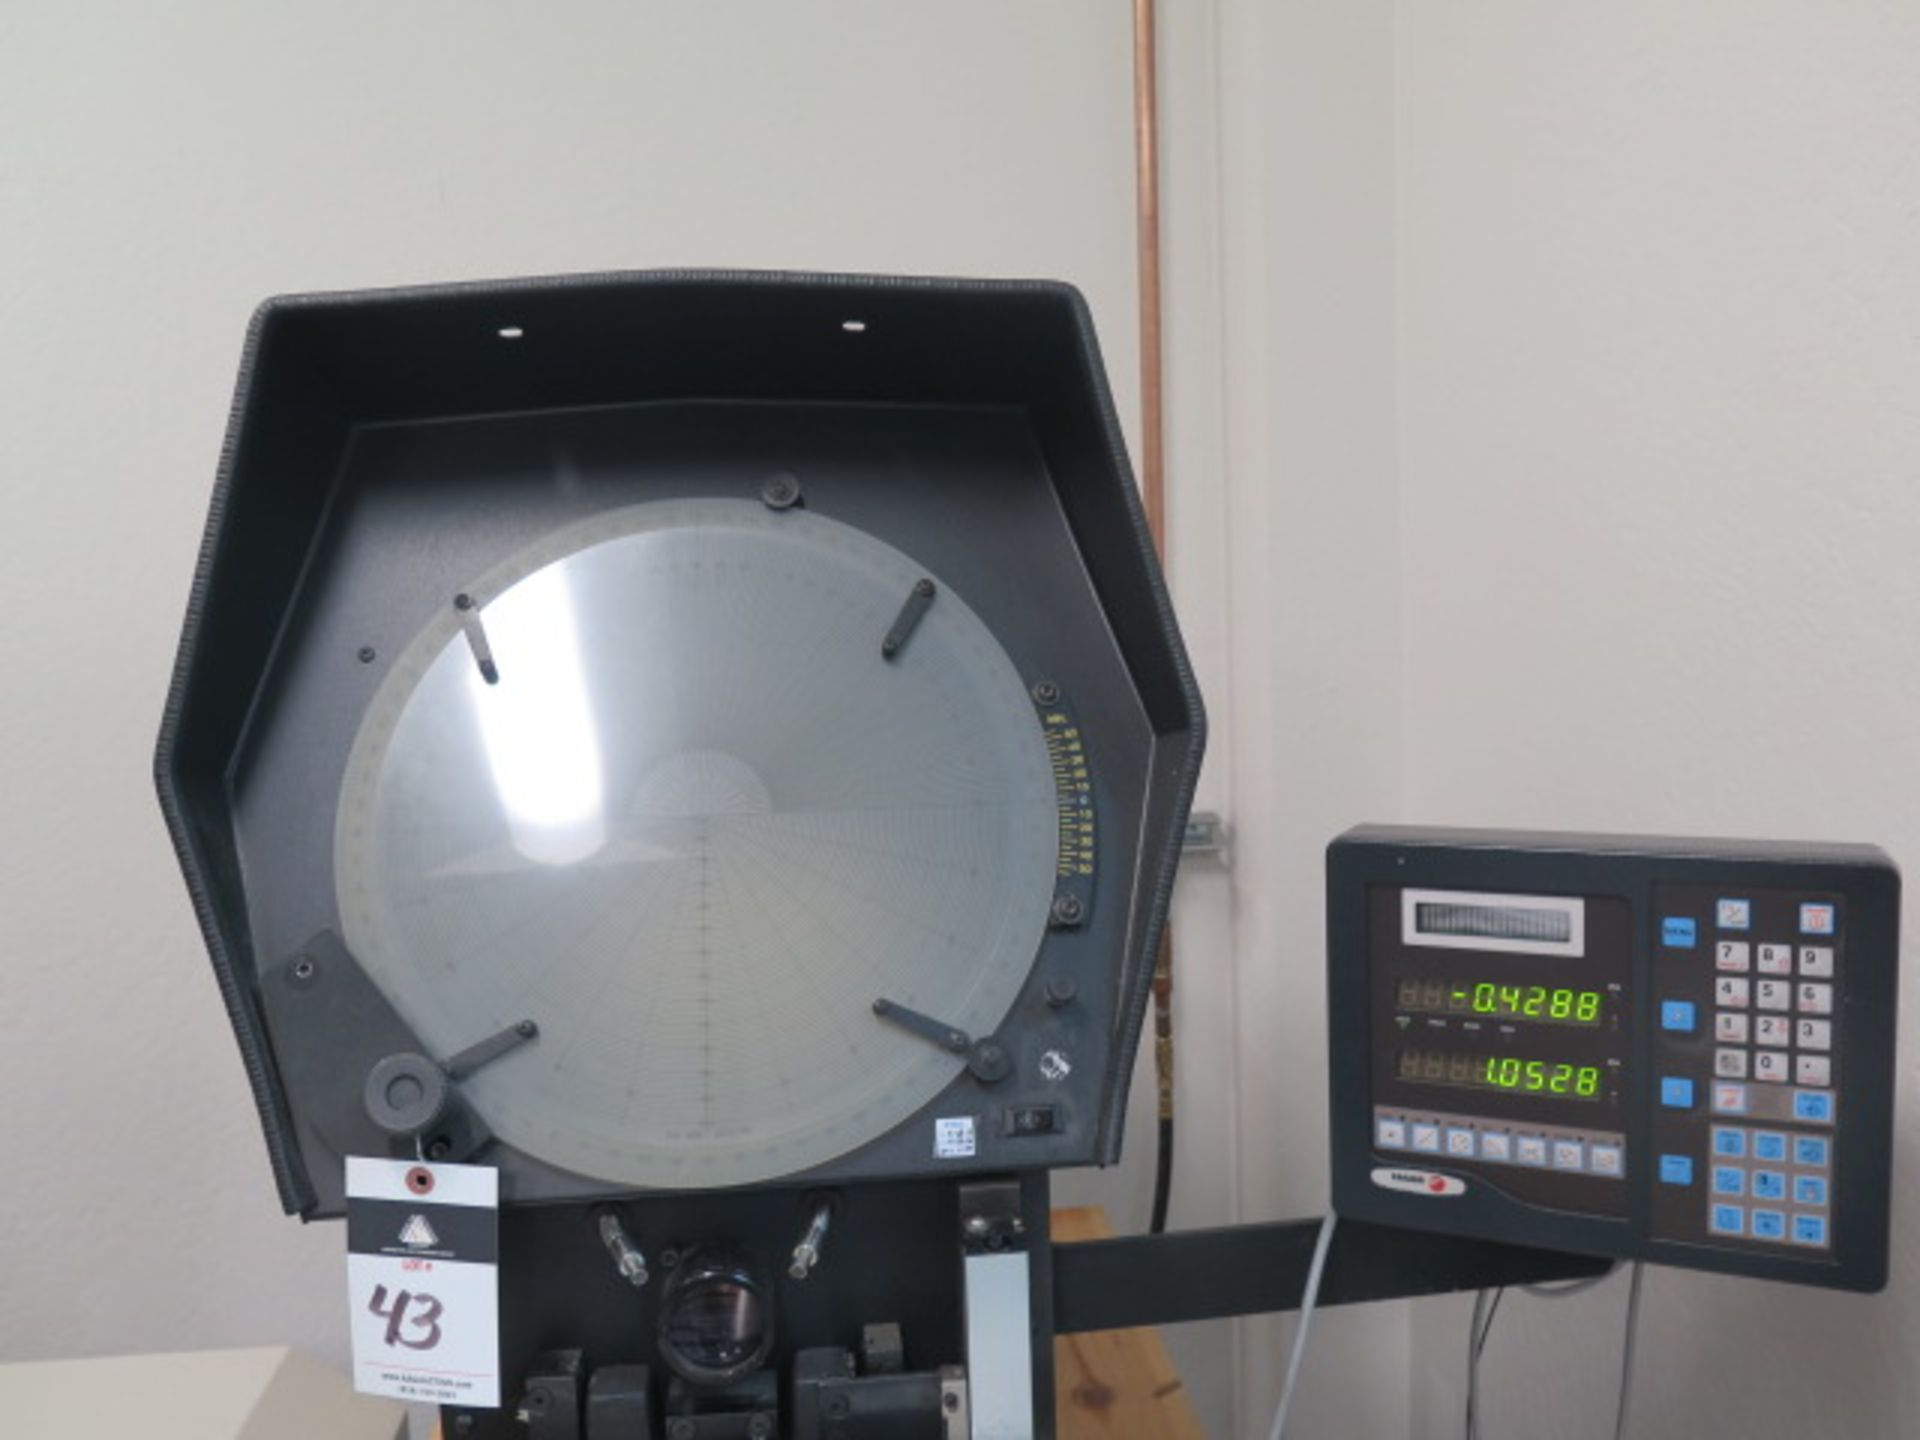 Suburban “Master View” mdl. MV14D 14” Optical Comparator s/n 3018-0903F w/ Fagor Programmable DRO, - Image 2 of 7